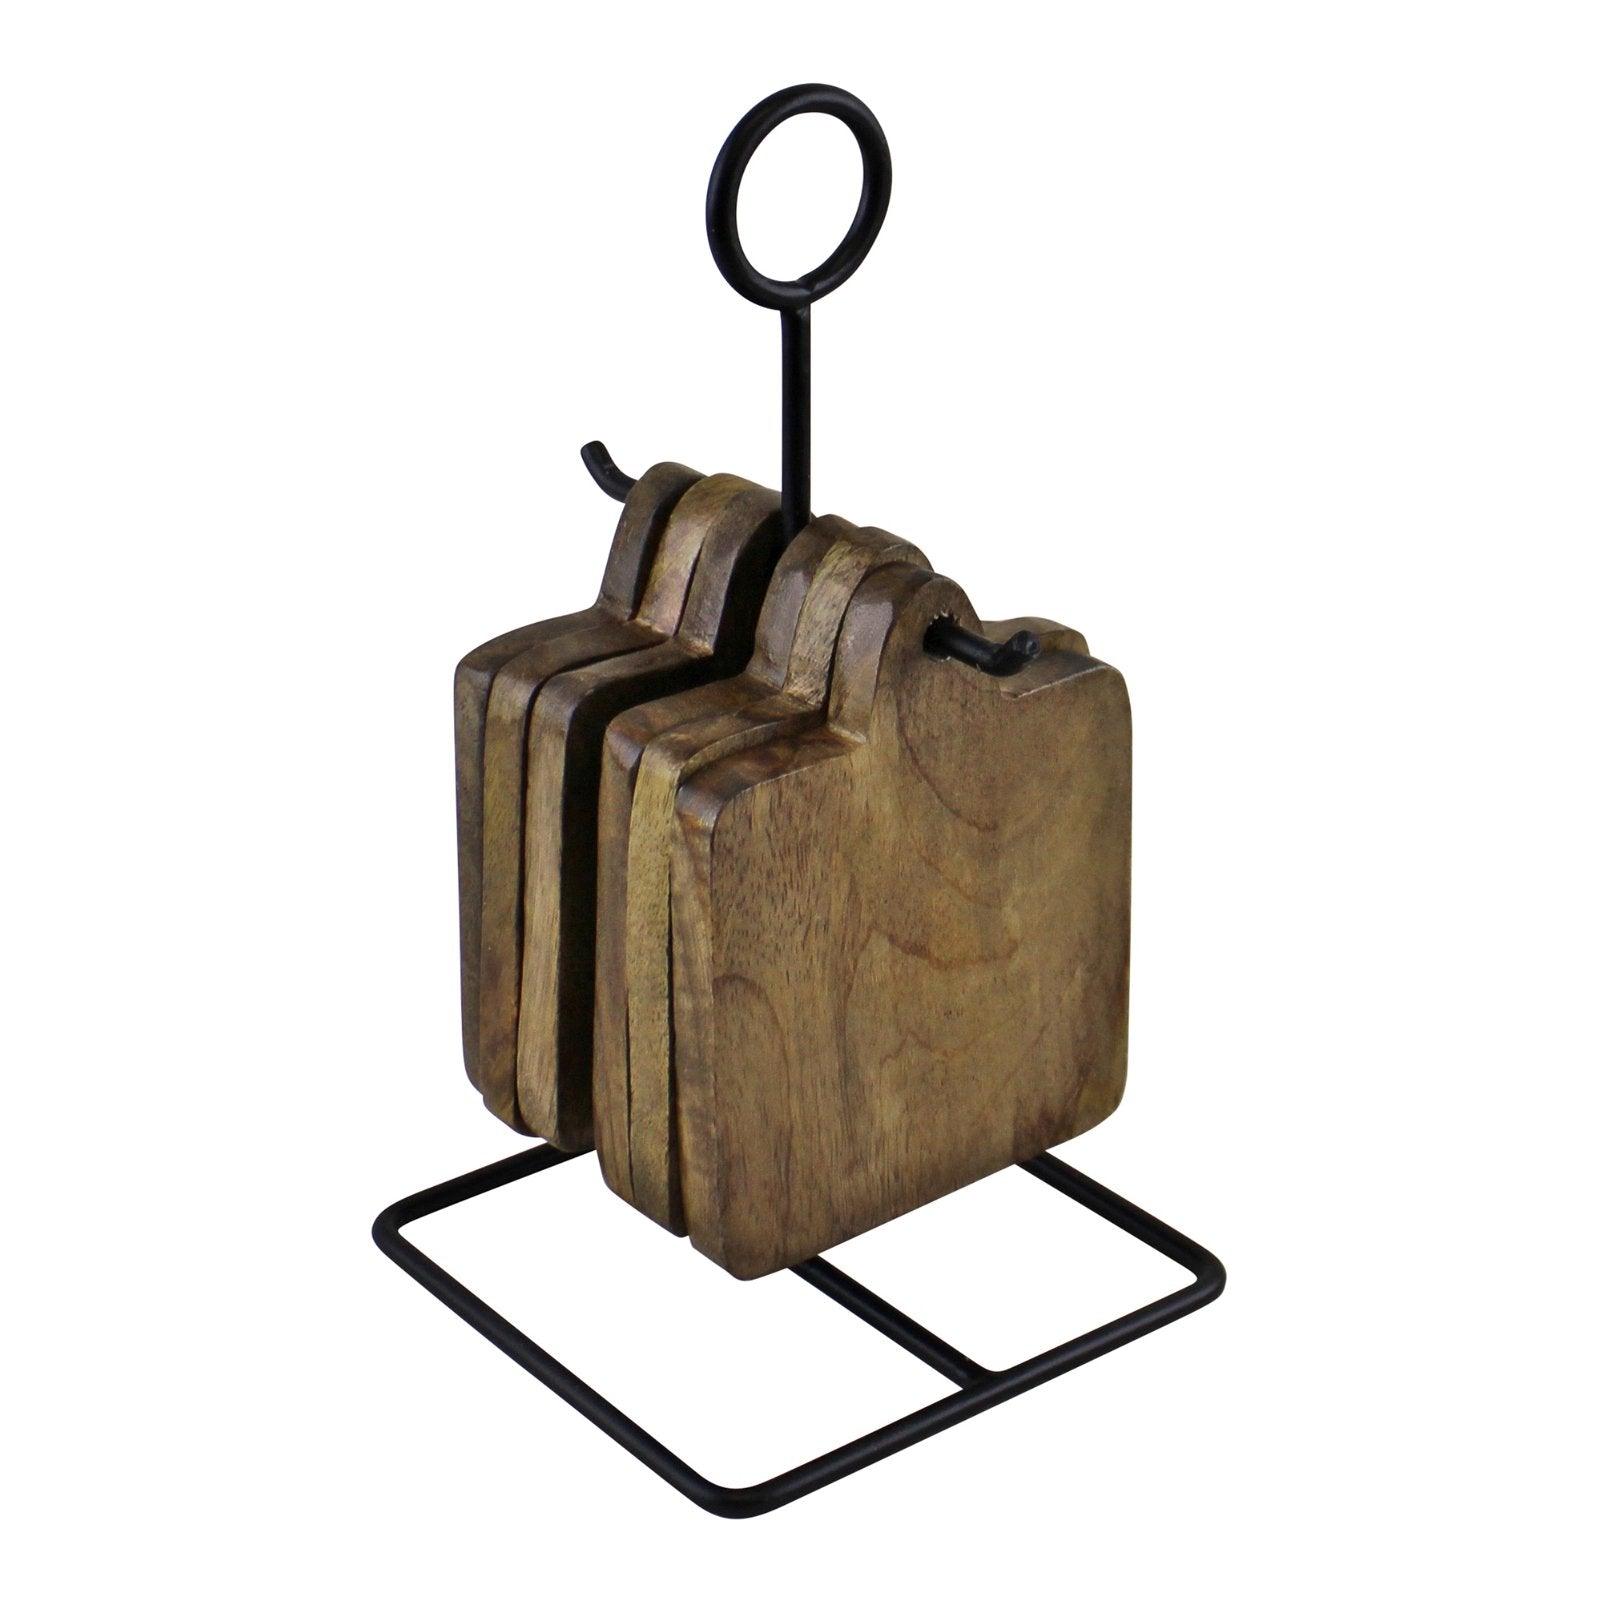 View Set Of 6 Mango Wood Coasters On Metal Stand information